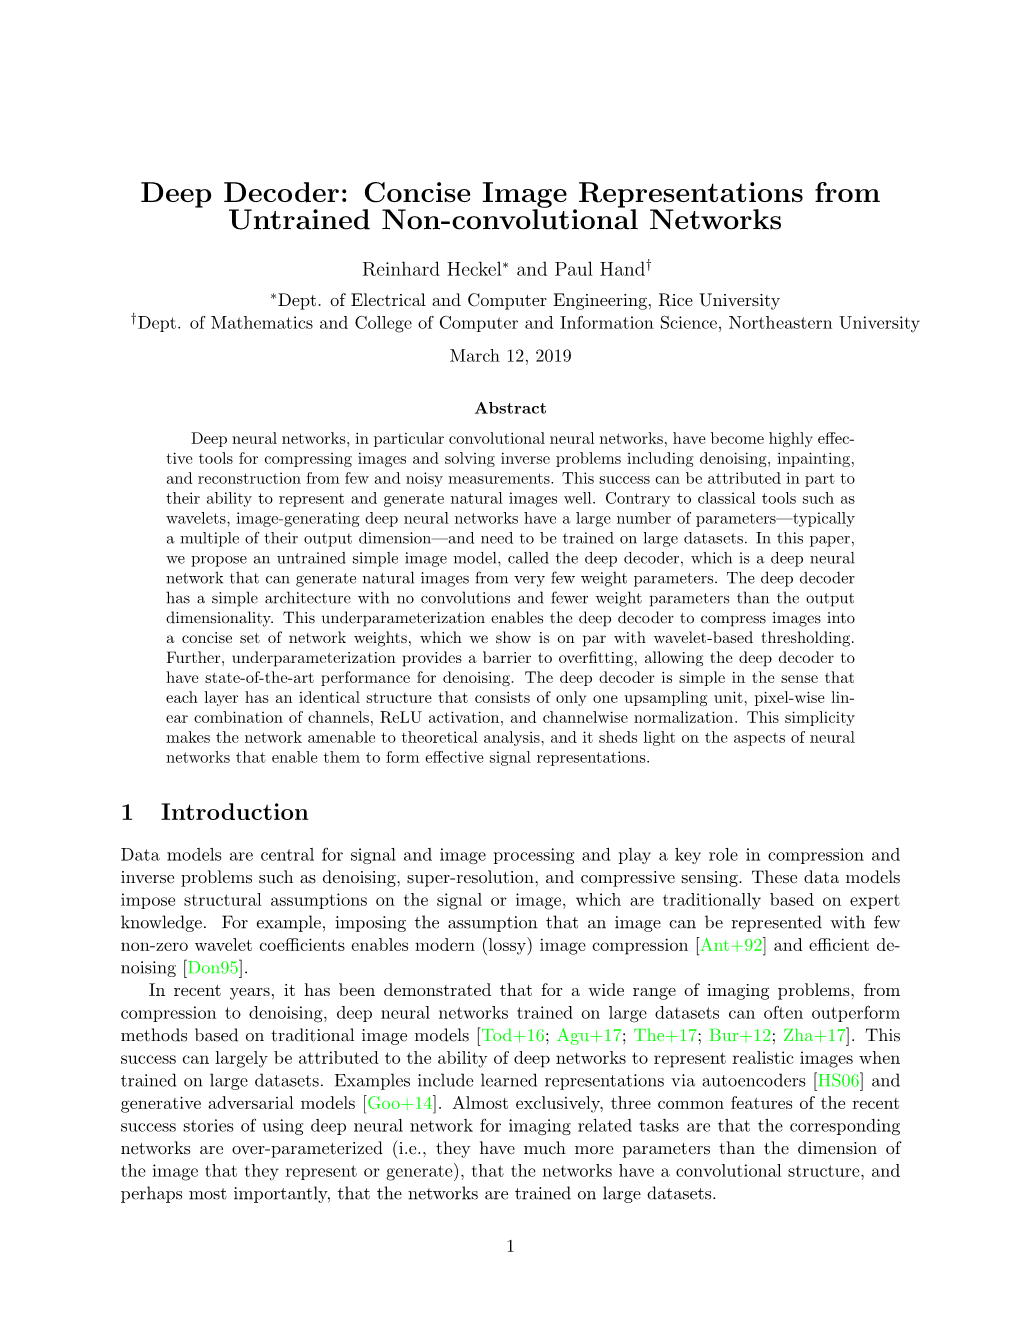 Deep Decoder: Concise Image Representations from Untrained Non-Convolutional Networks